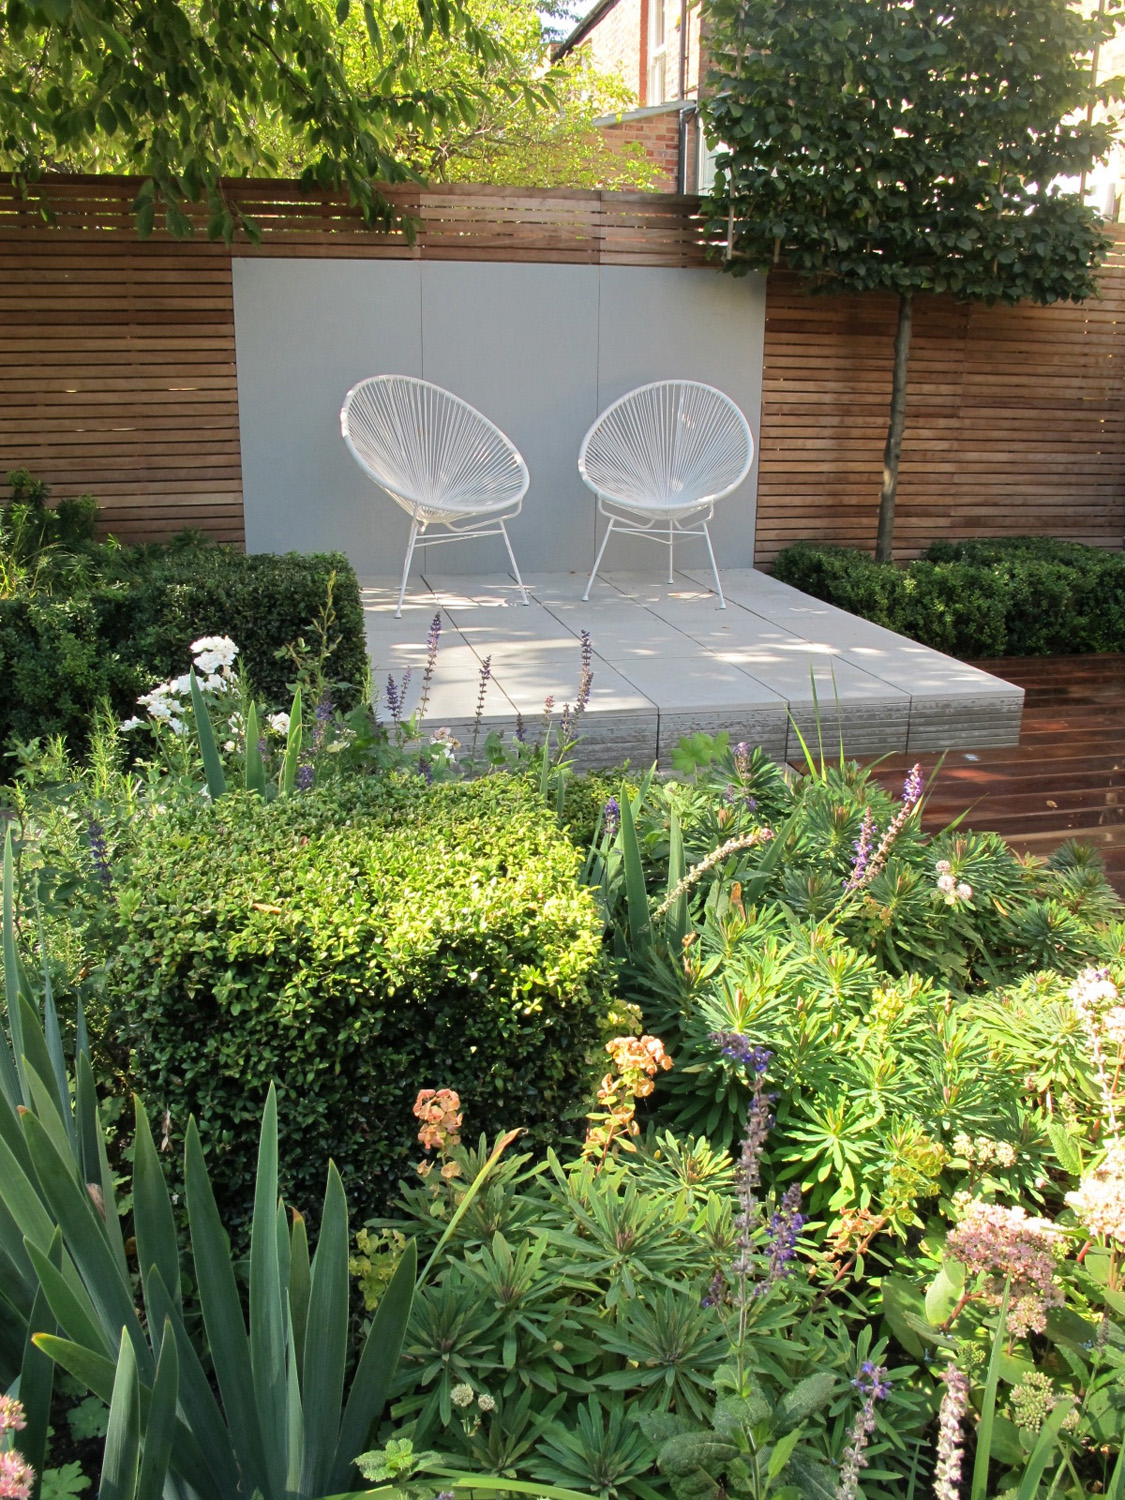 Garden chairs by Lucy Wilcox - contemporary landscape design in London